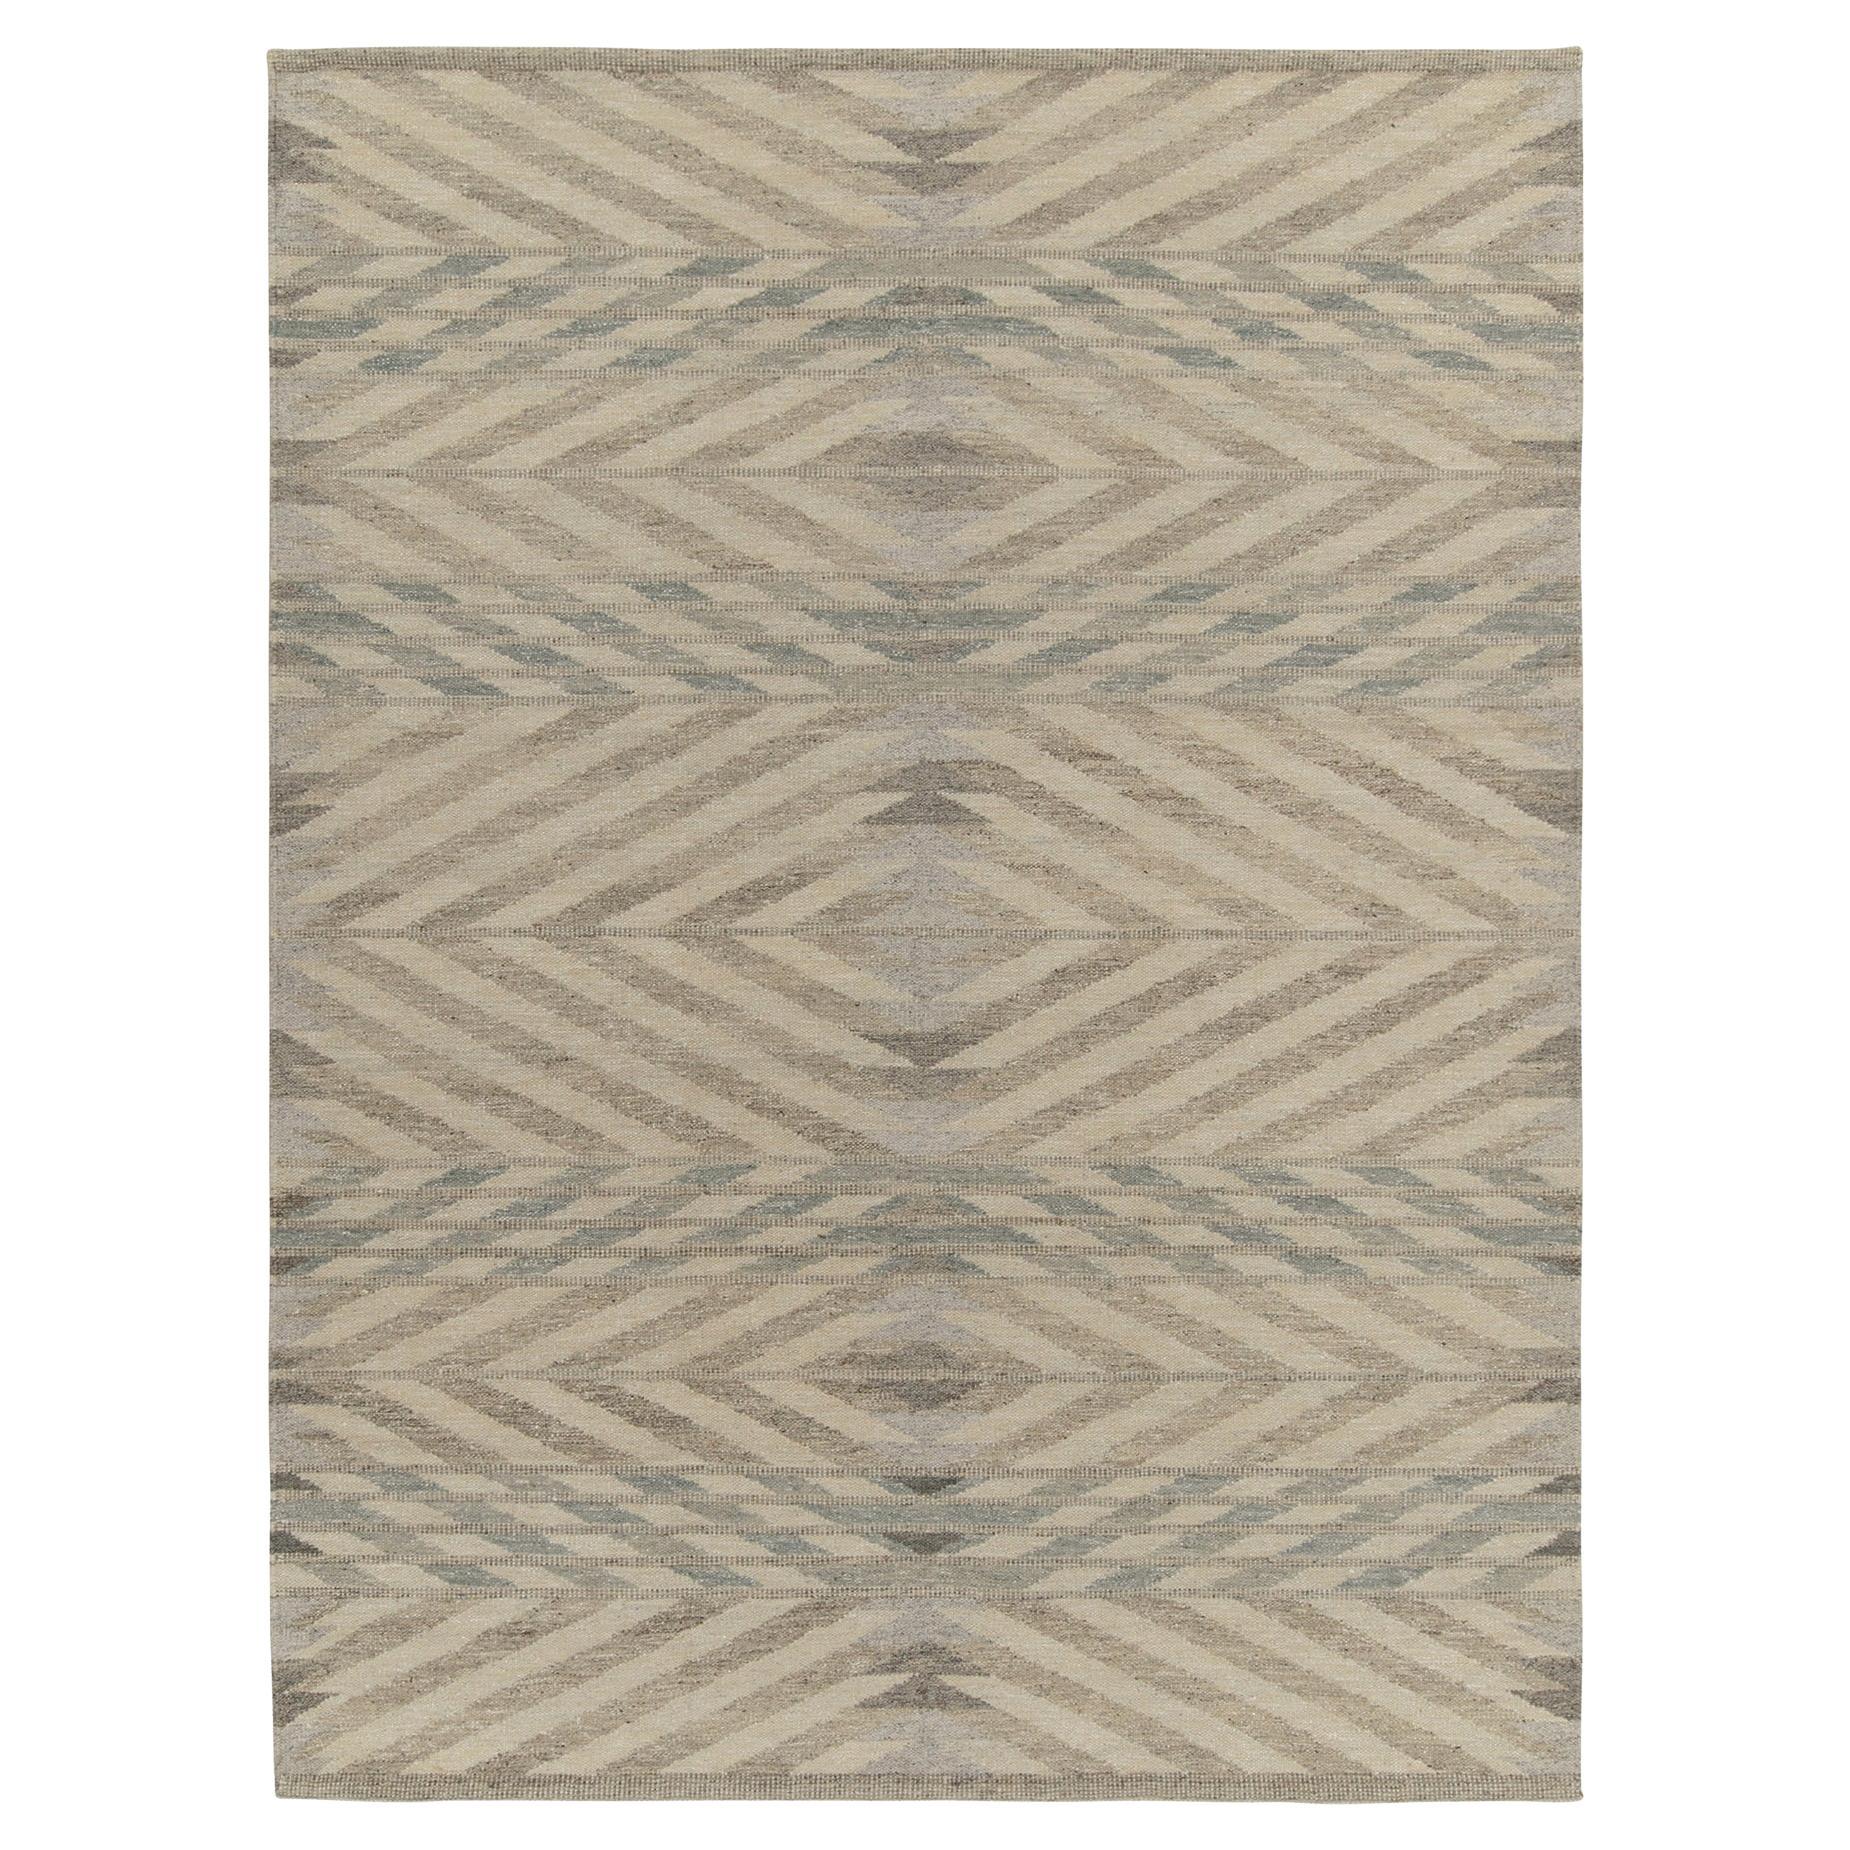 Rug & Kilim’s Scandinavian style Kilim in Beige-Brown and Blue Chevrons For Sale